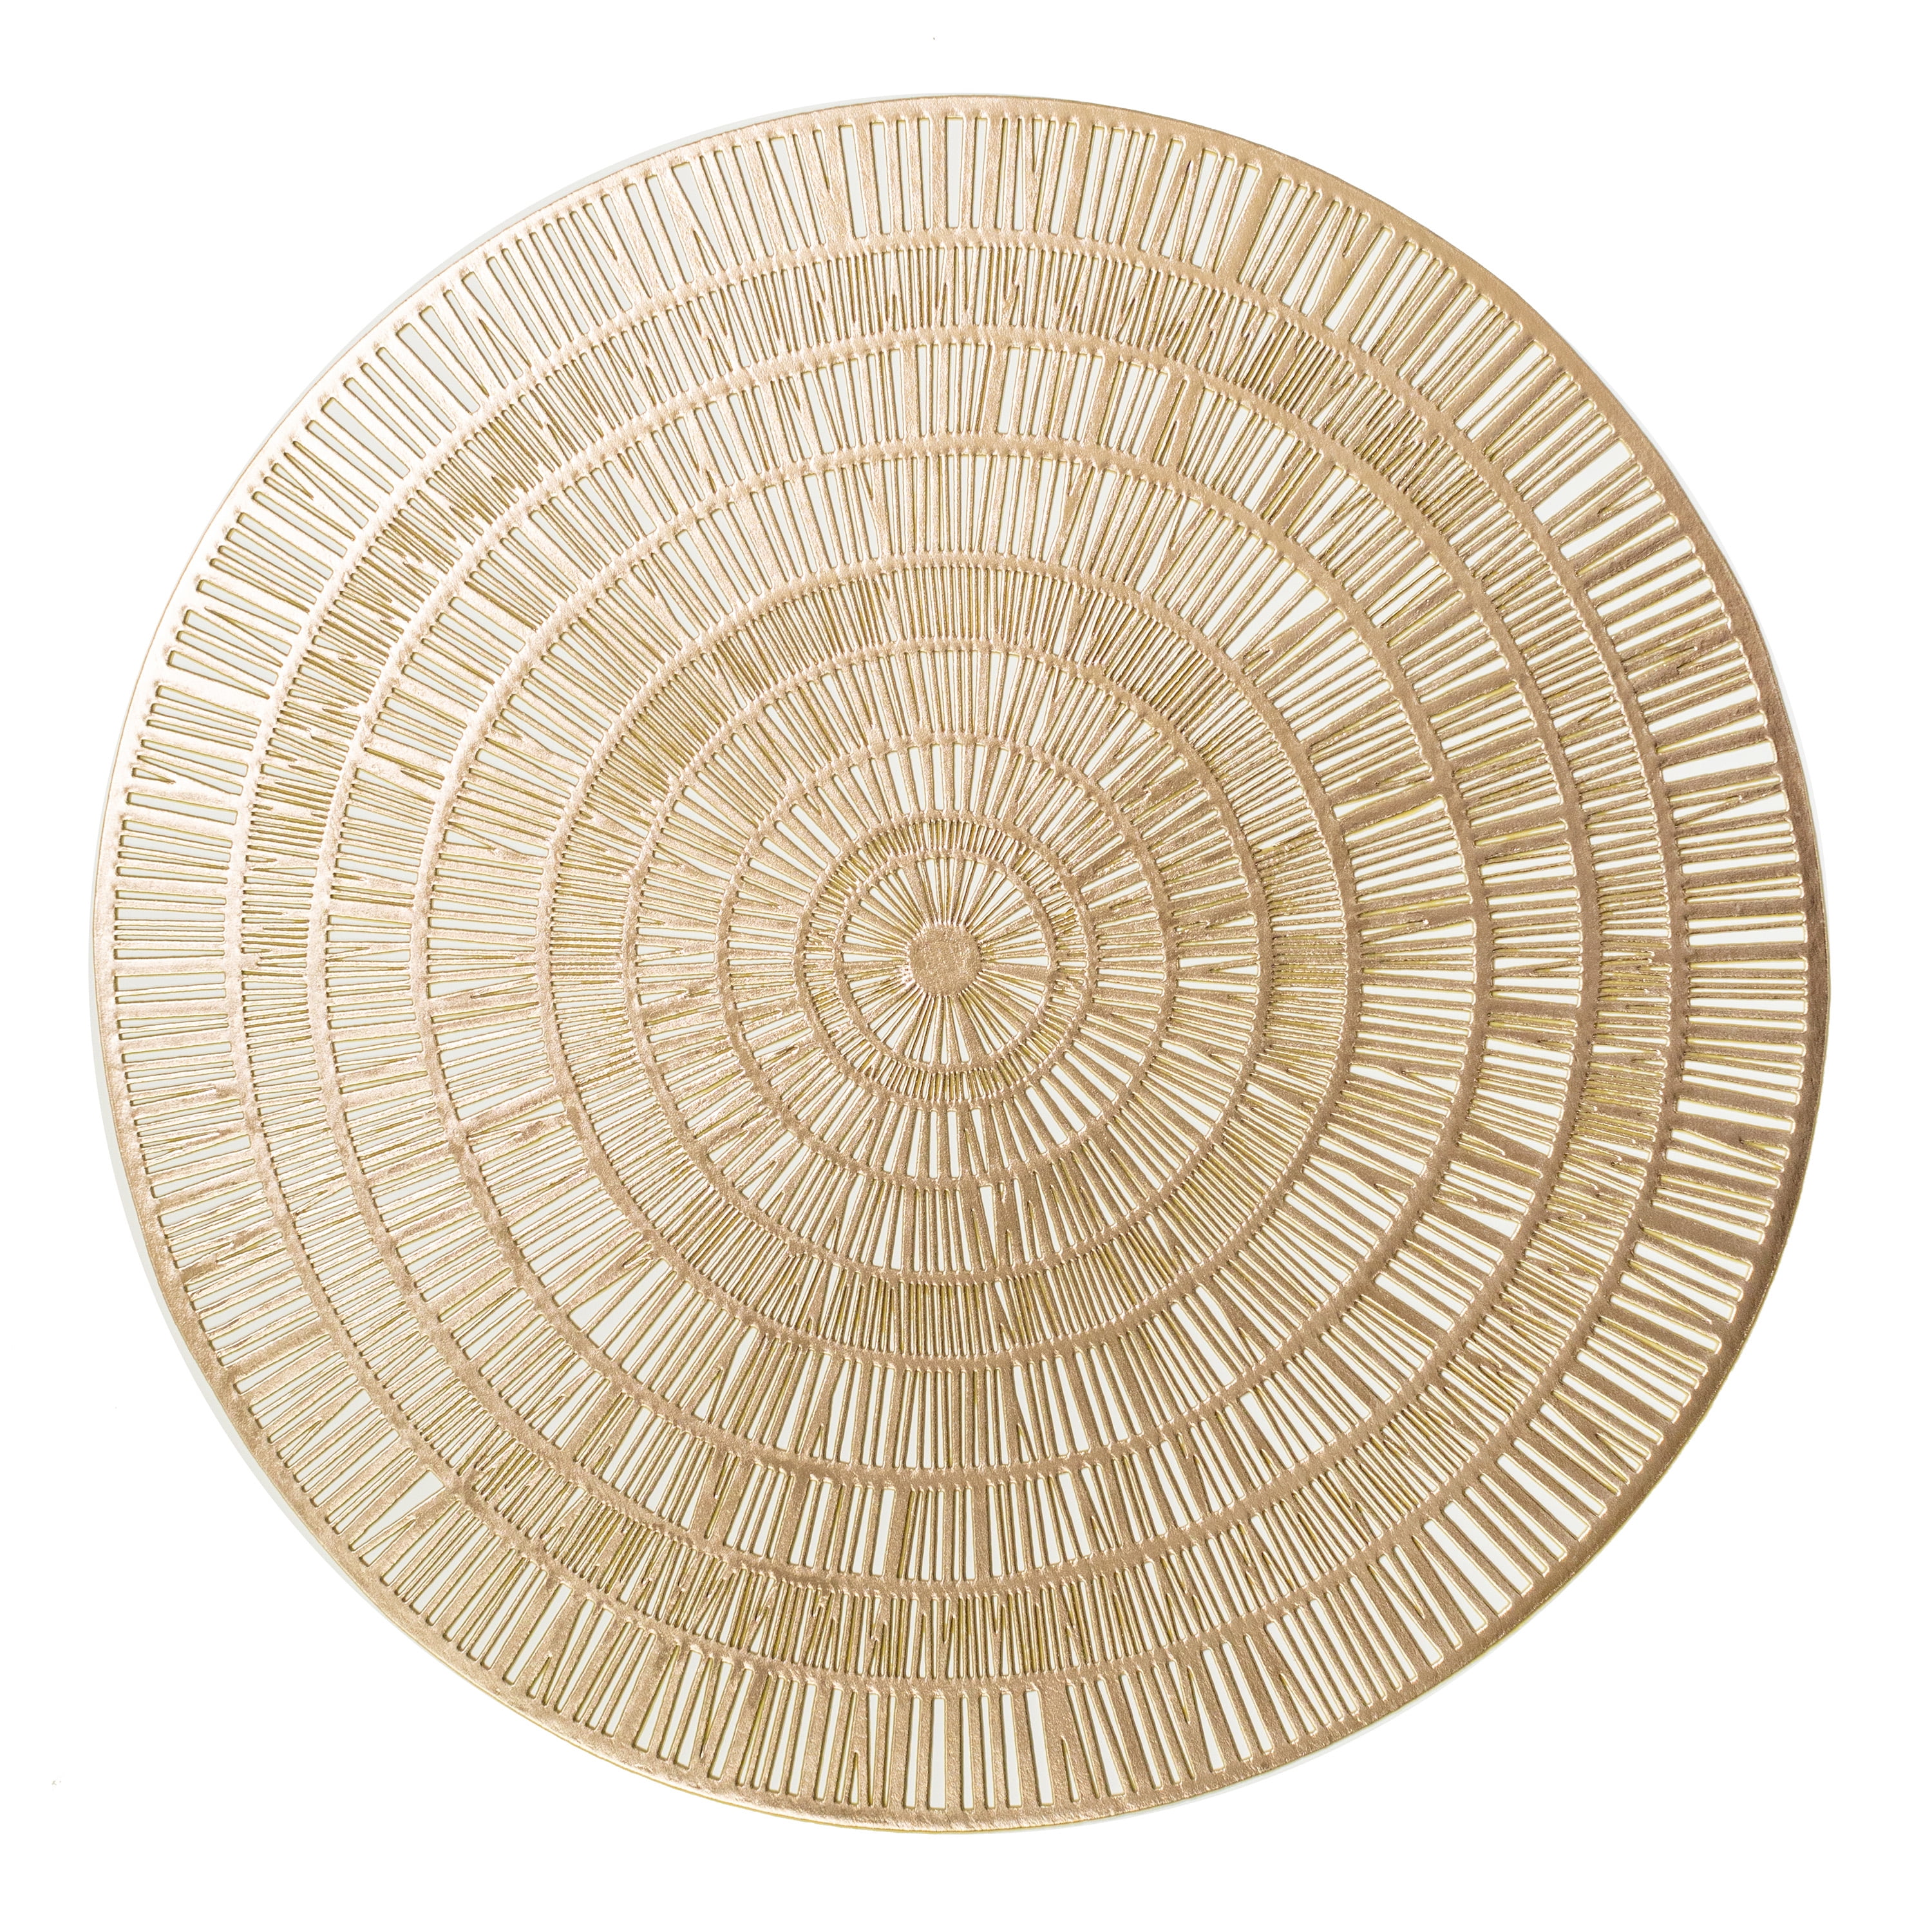 Mainstays Zayne Pressed Vinyl Round Table Placemat Gold 15.8" RD (1 piece)